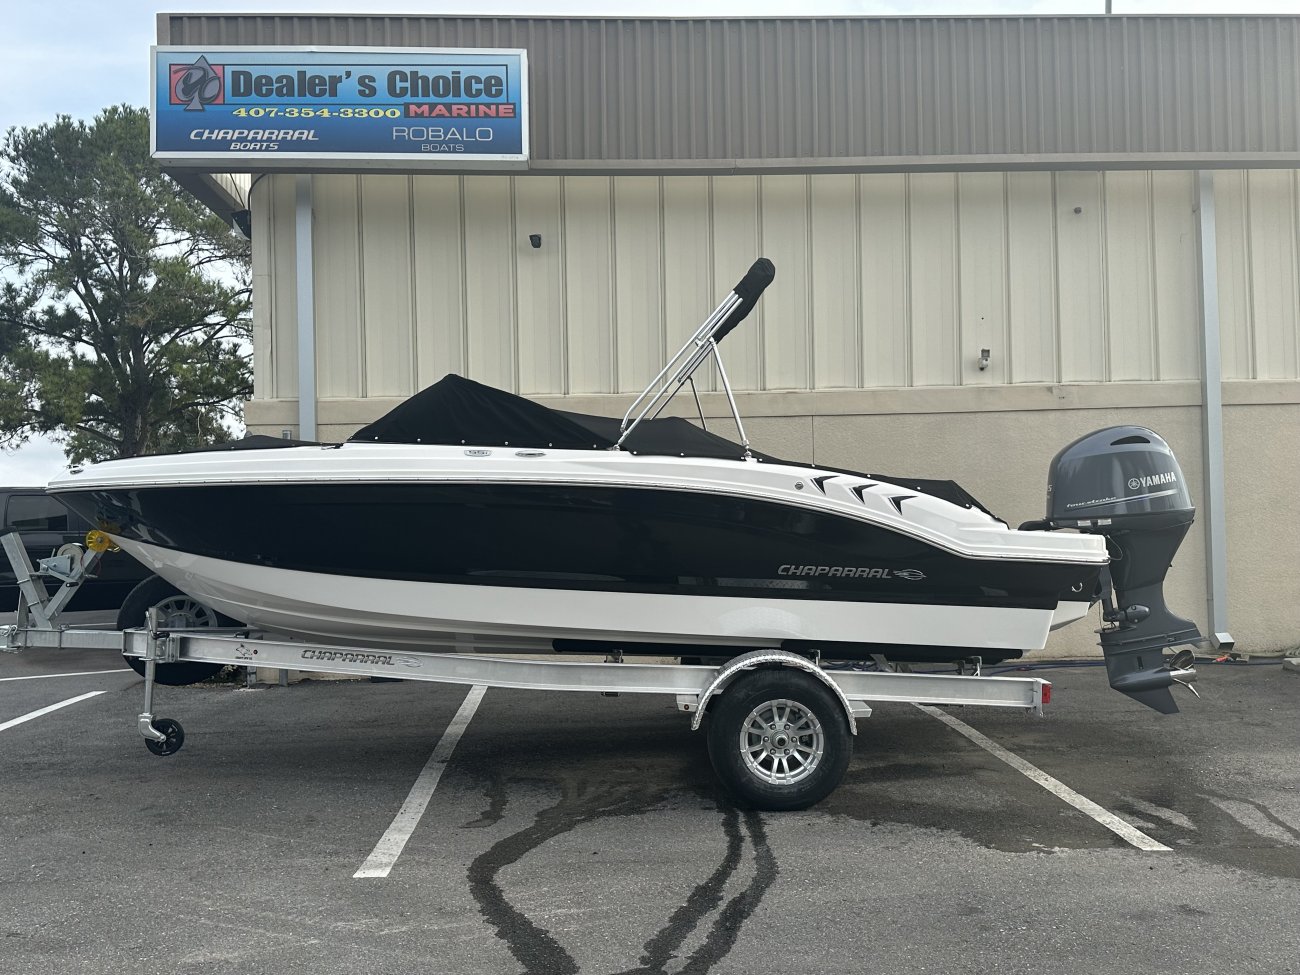 A 19 SSI Outboard Bowrider is a Power and could be classed as a Bowrider, Deck Boat, Dual Console, High Performance, Runabout,  or, just an overall Great Boat!